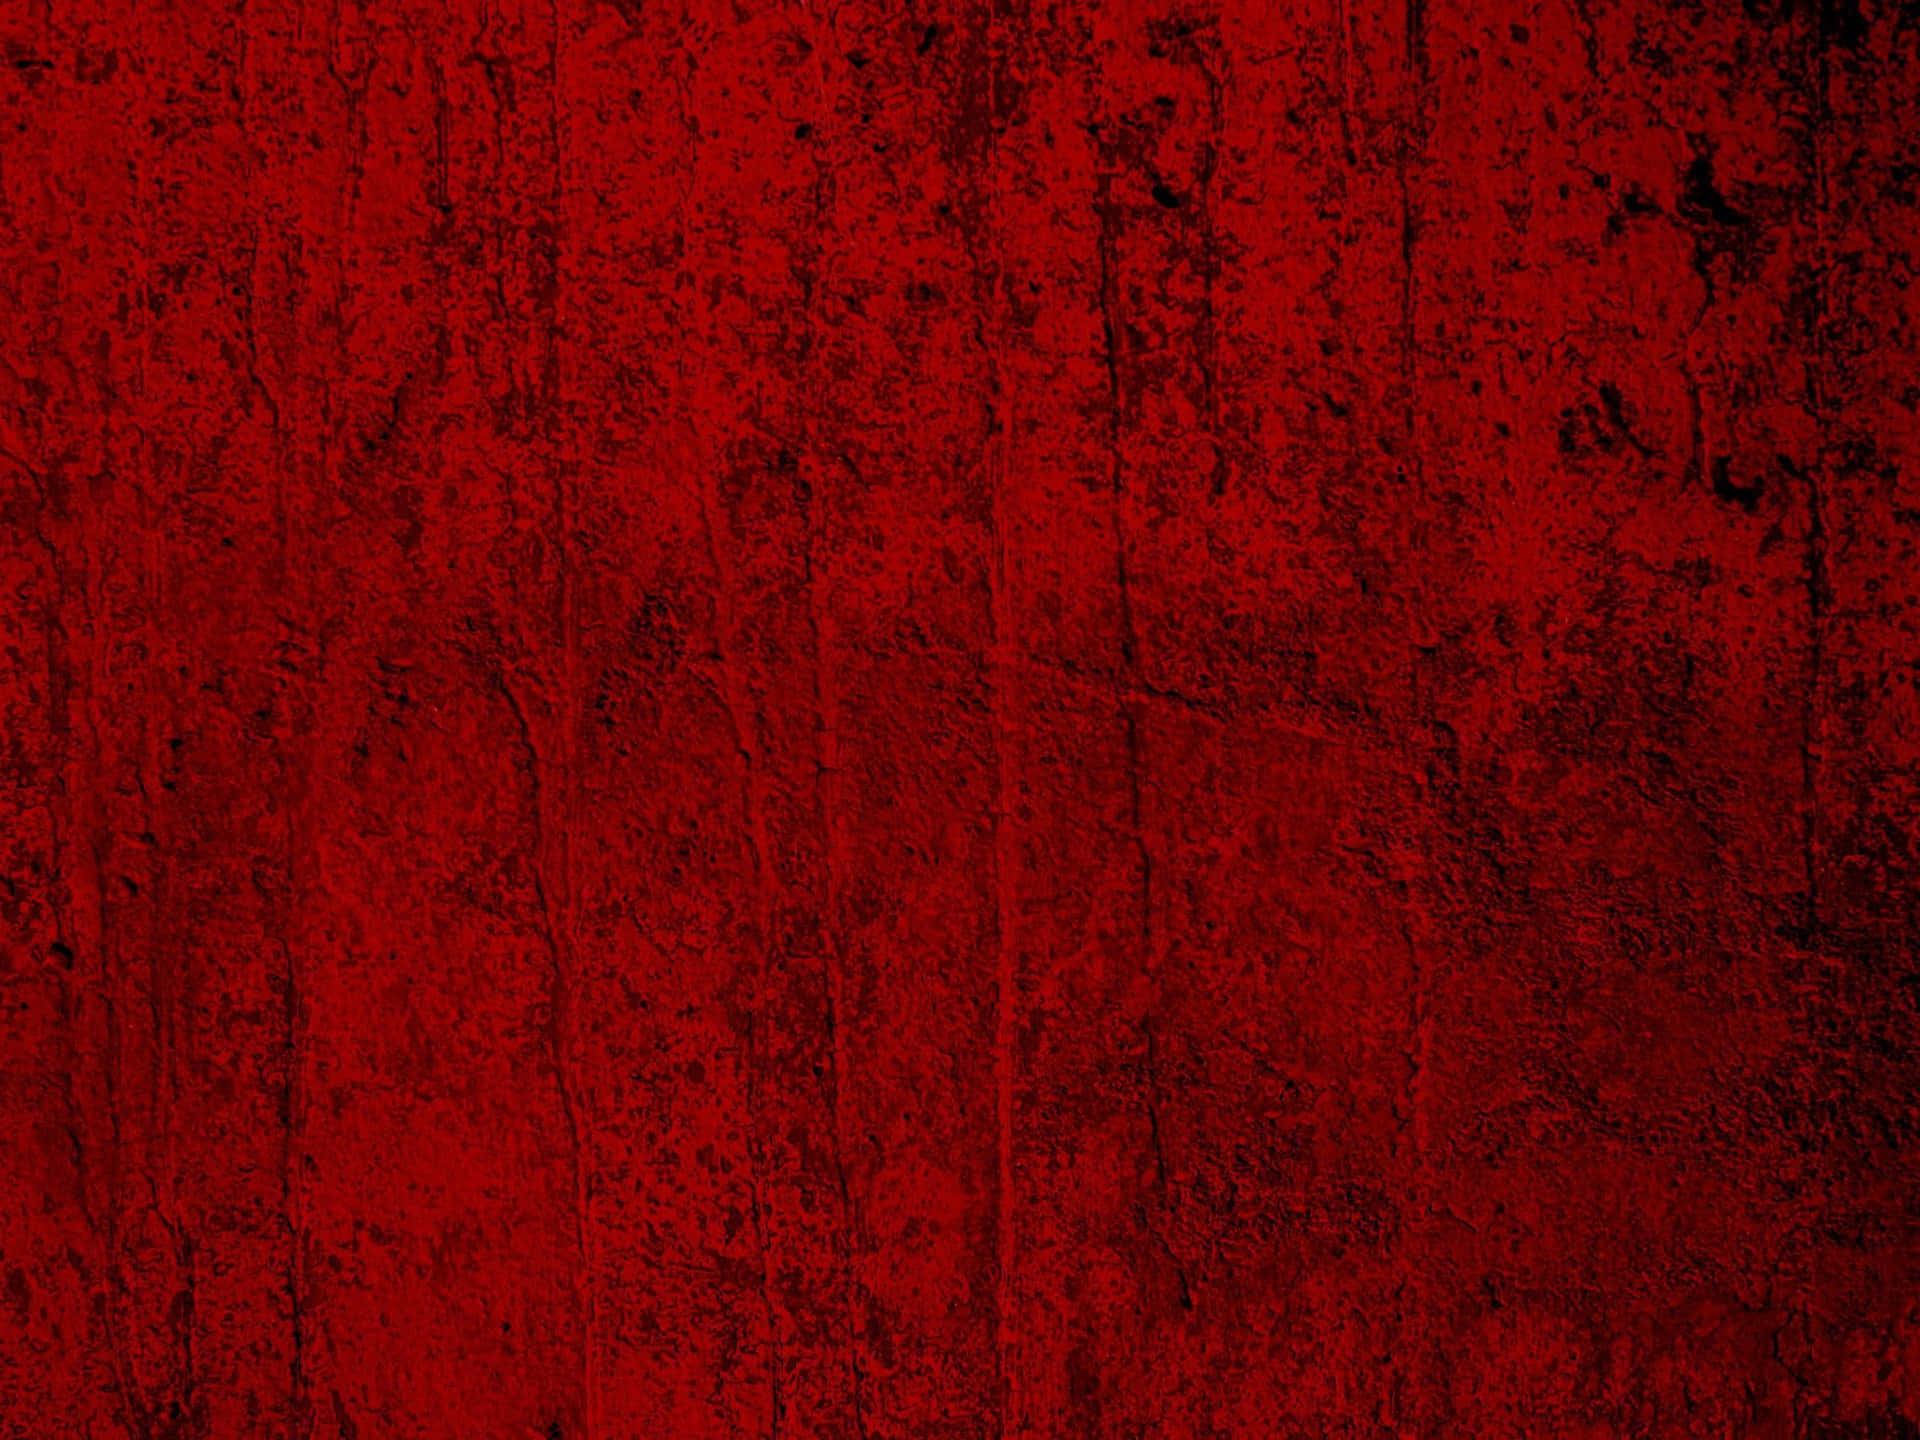 "The Texture of Red Grunge" Wallpaper